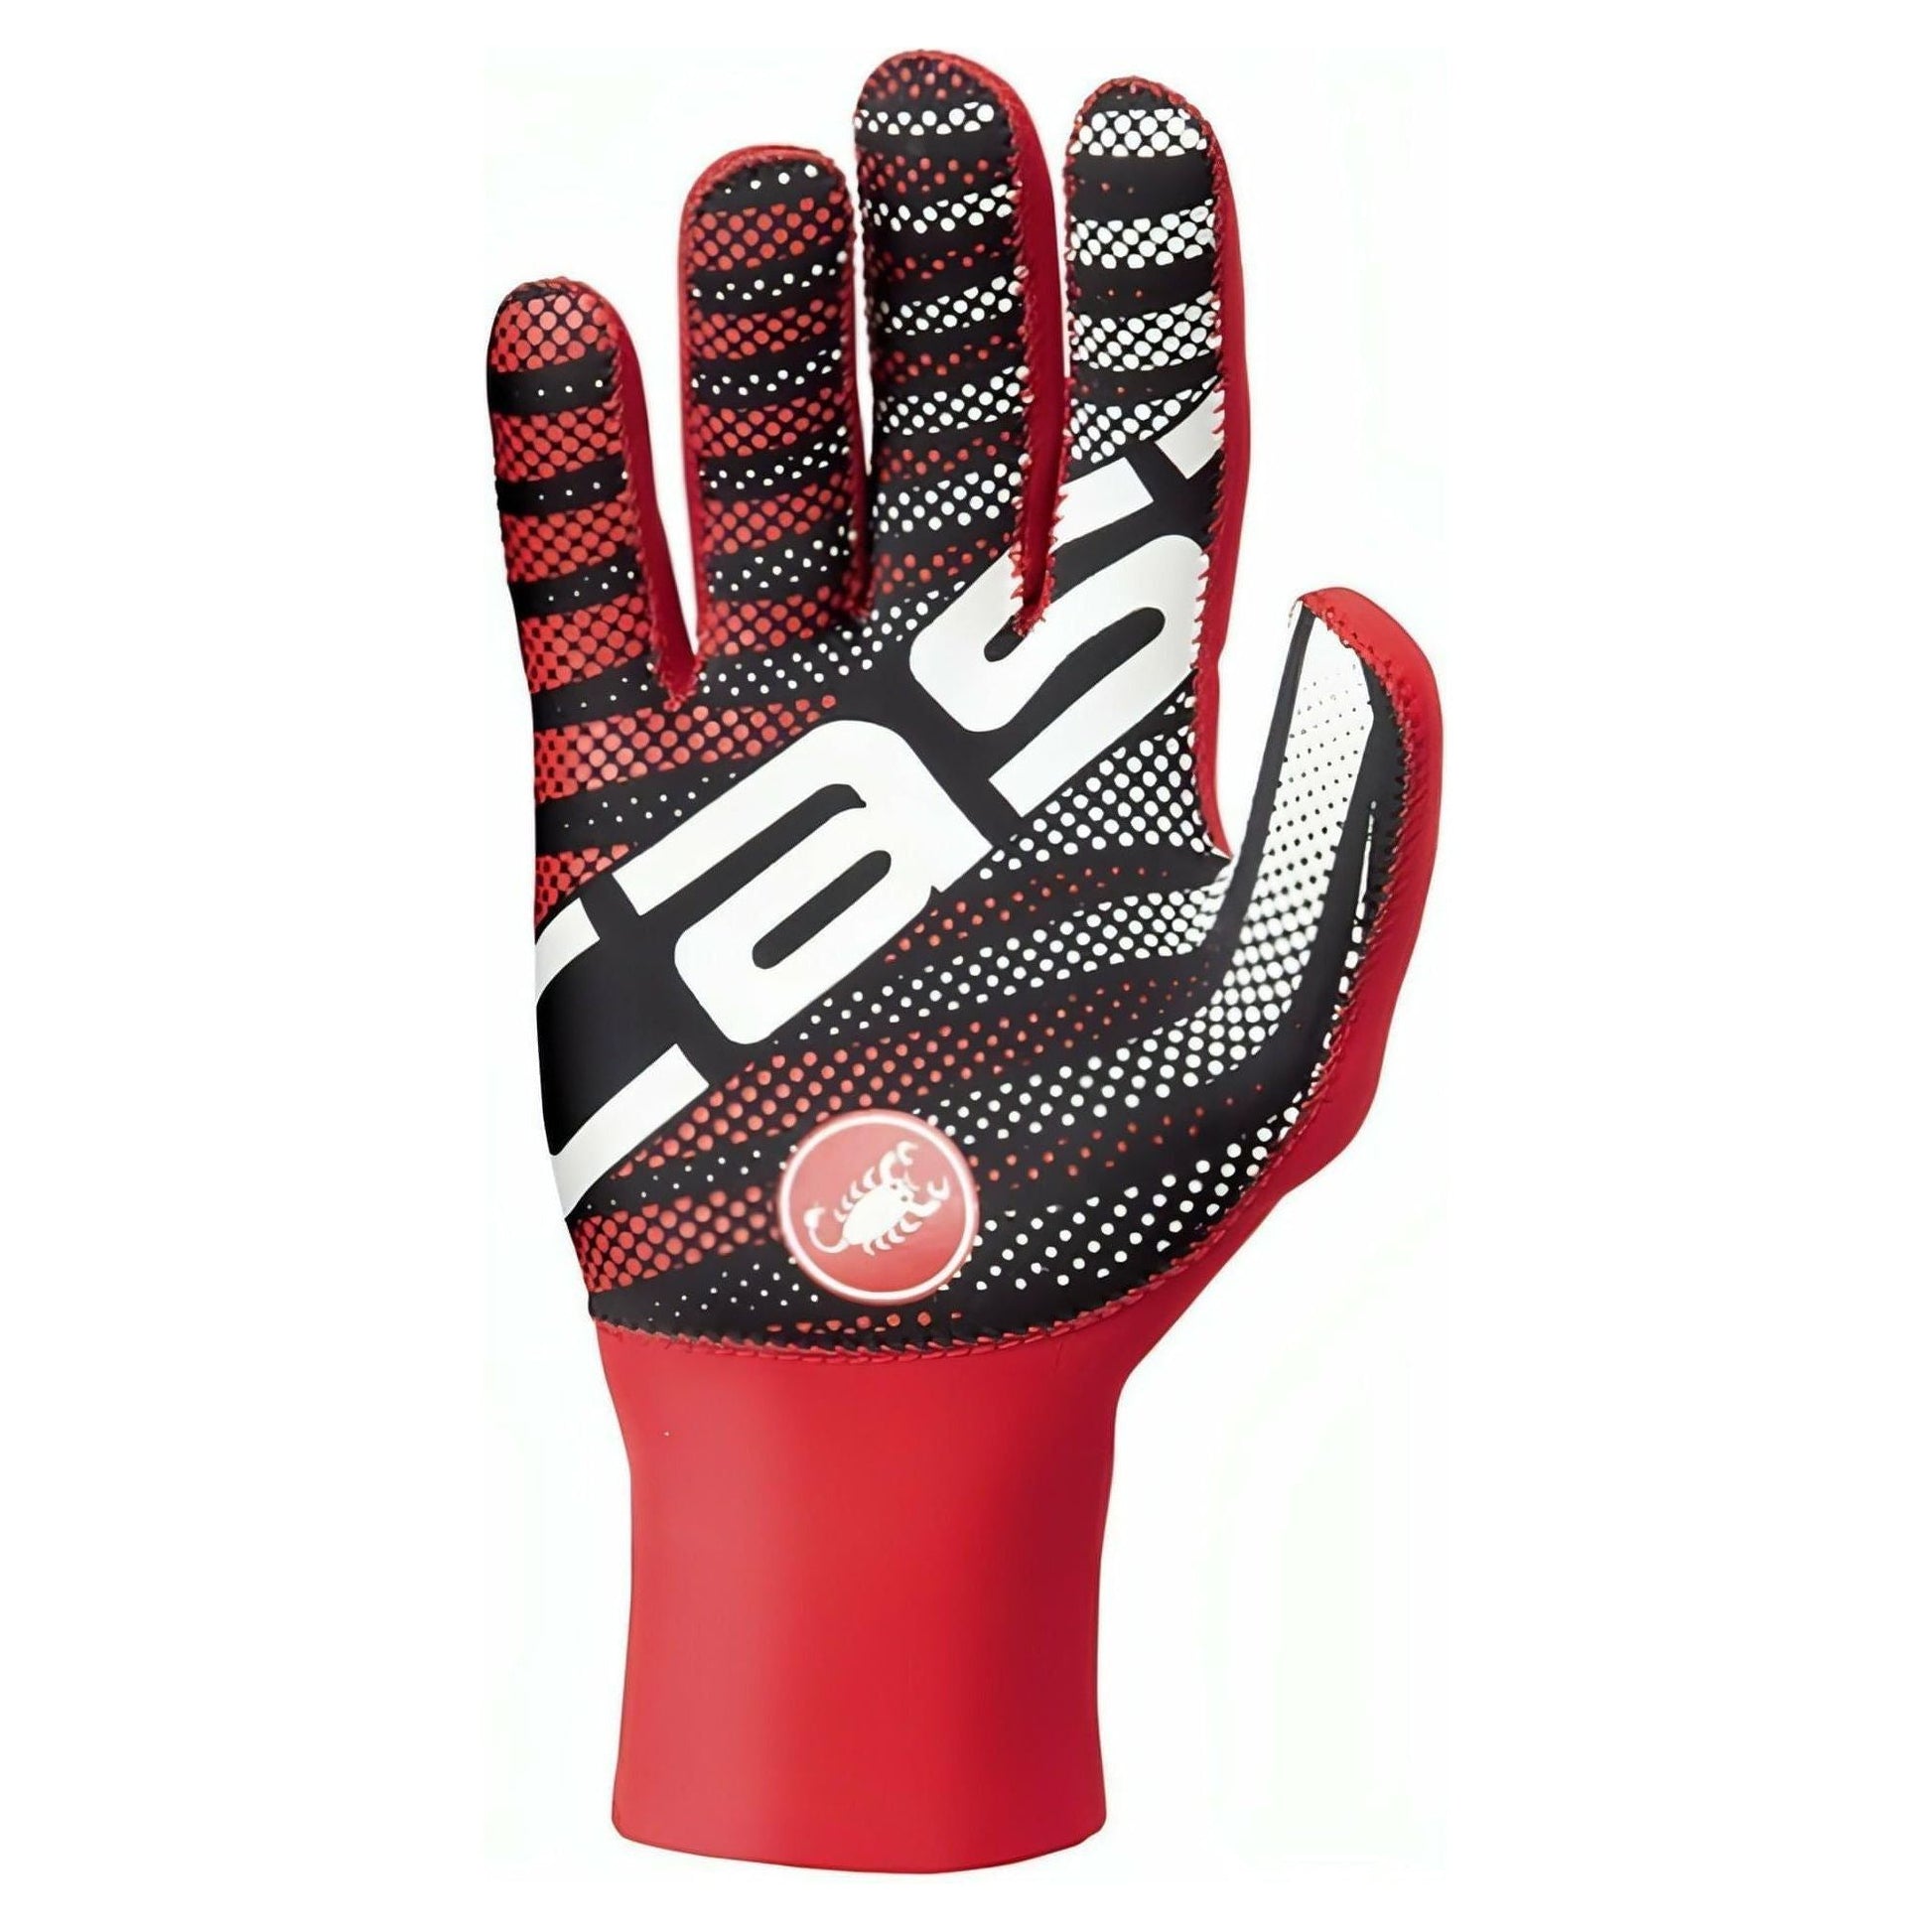 Castelli Diluvio Cycling Gloves - Red - Start Fitness